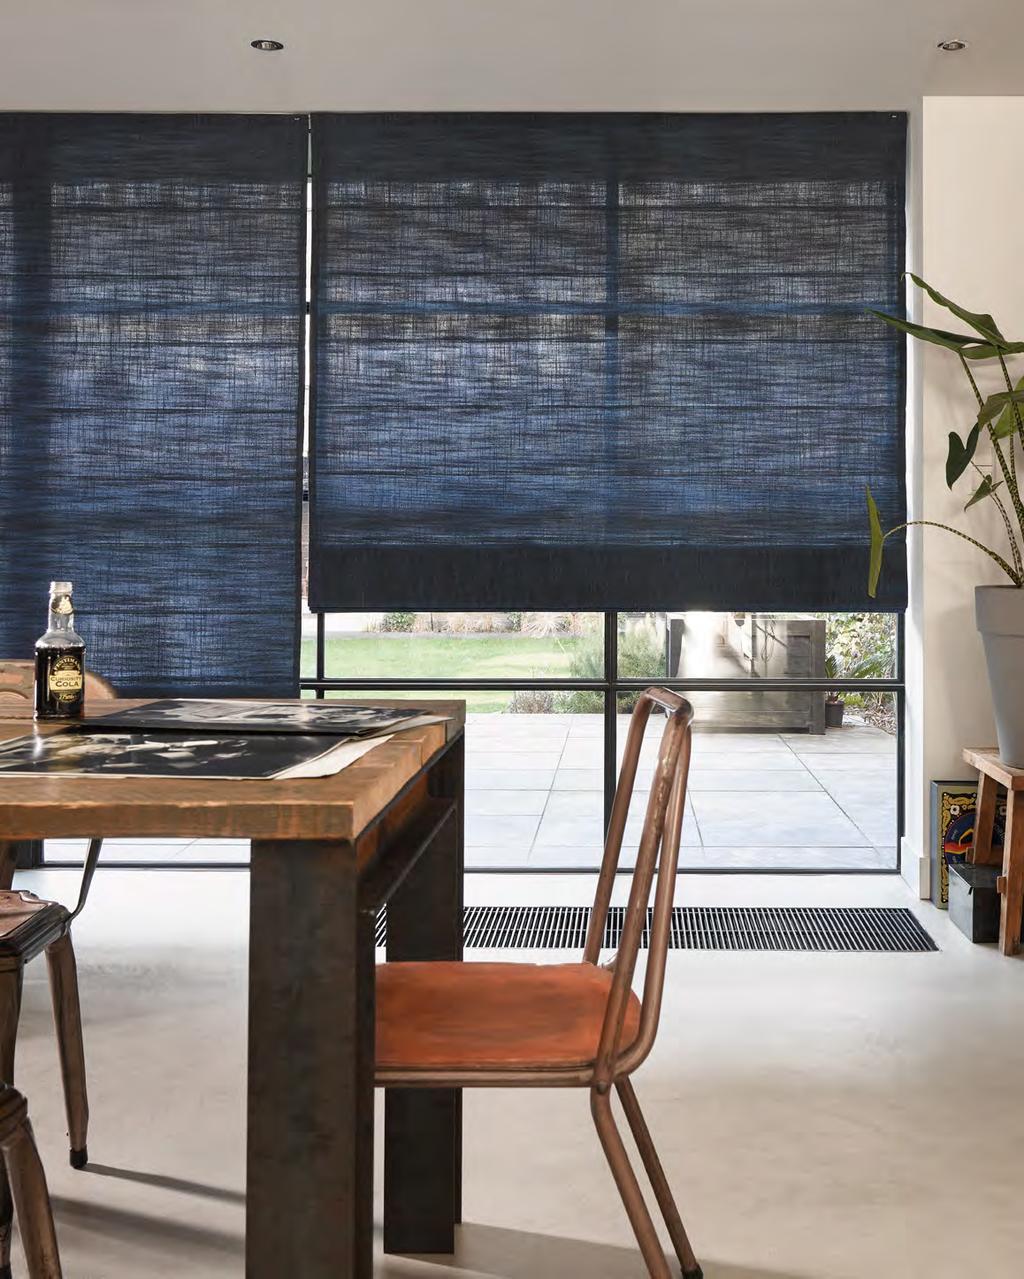 Our new Roman Blind collection celebrates our passion for the natural beauty and versatility of the fabrics we create, to enhance the home you love.